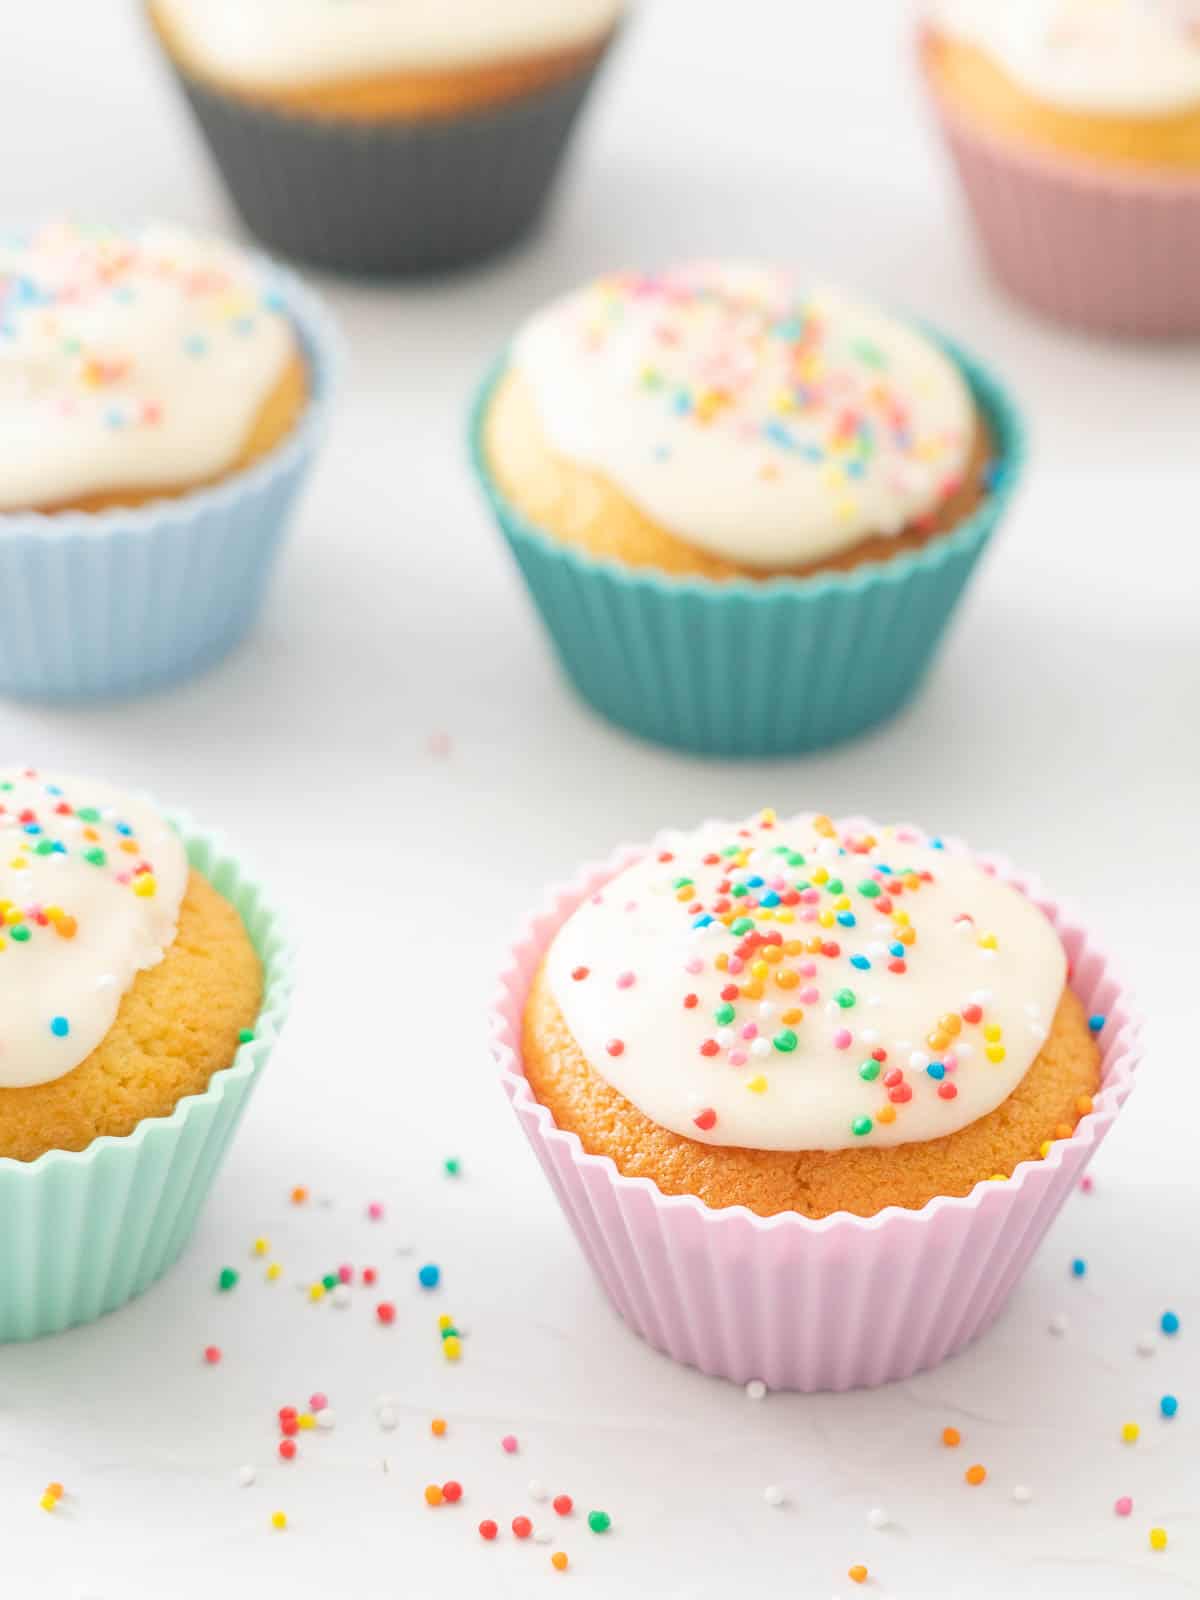 Cupcakes decorated with white glaze and rainbow sprinkles on a white bench top.